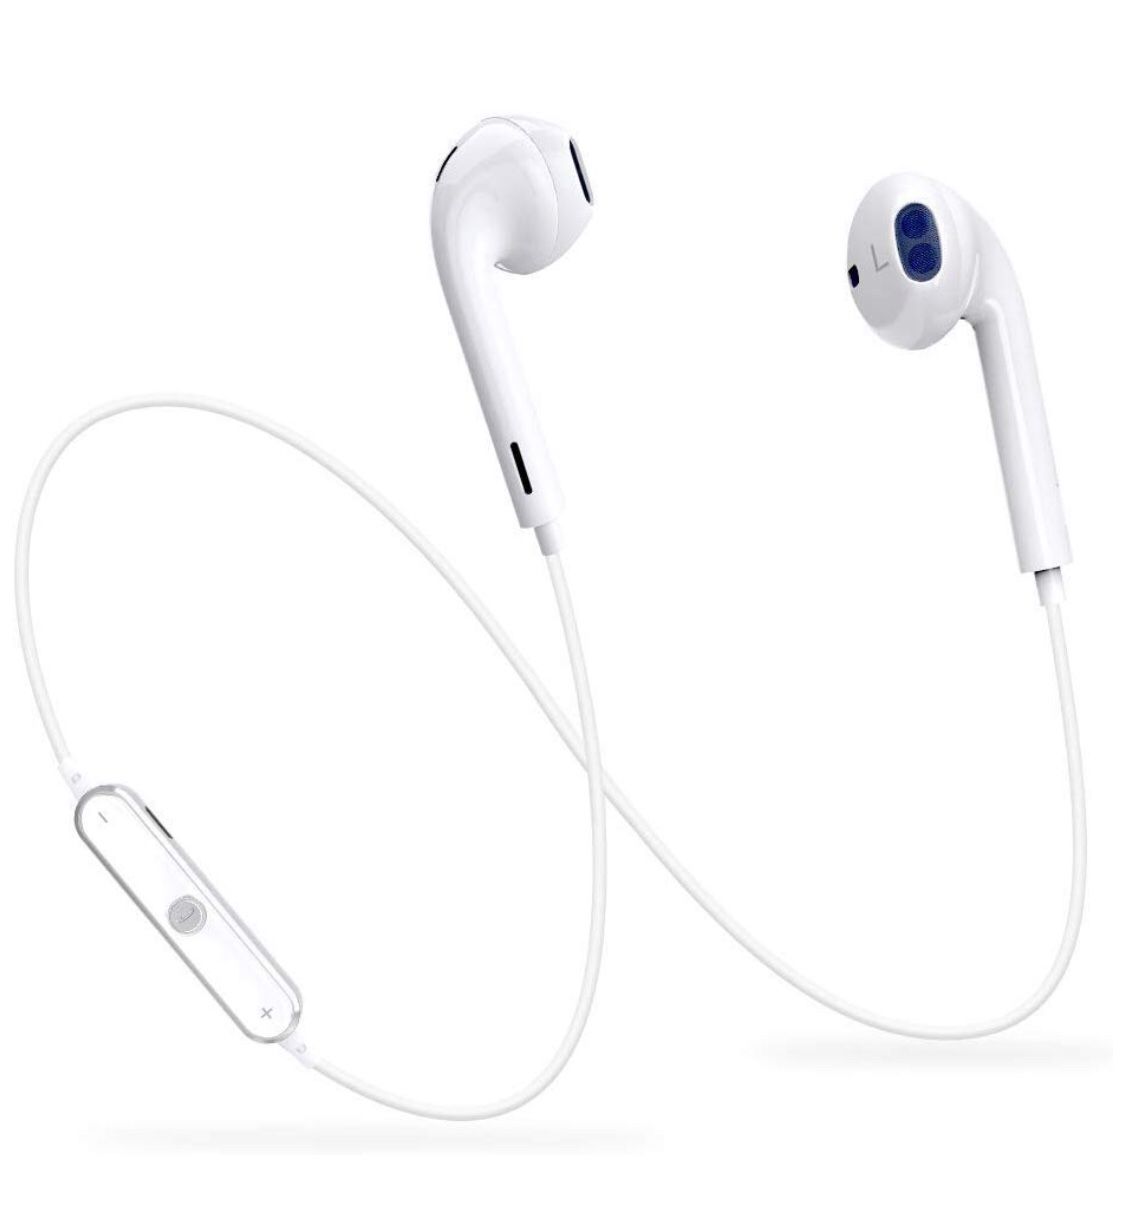 Brand-new Bluetooth Headphones, Bluetooth Earbuds with Mic V4.1 Wireless Stereo Earbuds Earphones Noise Cancelling Sweatproof Sports Bluetooth Headse